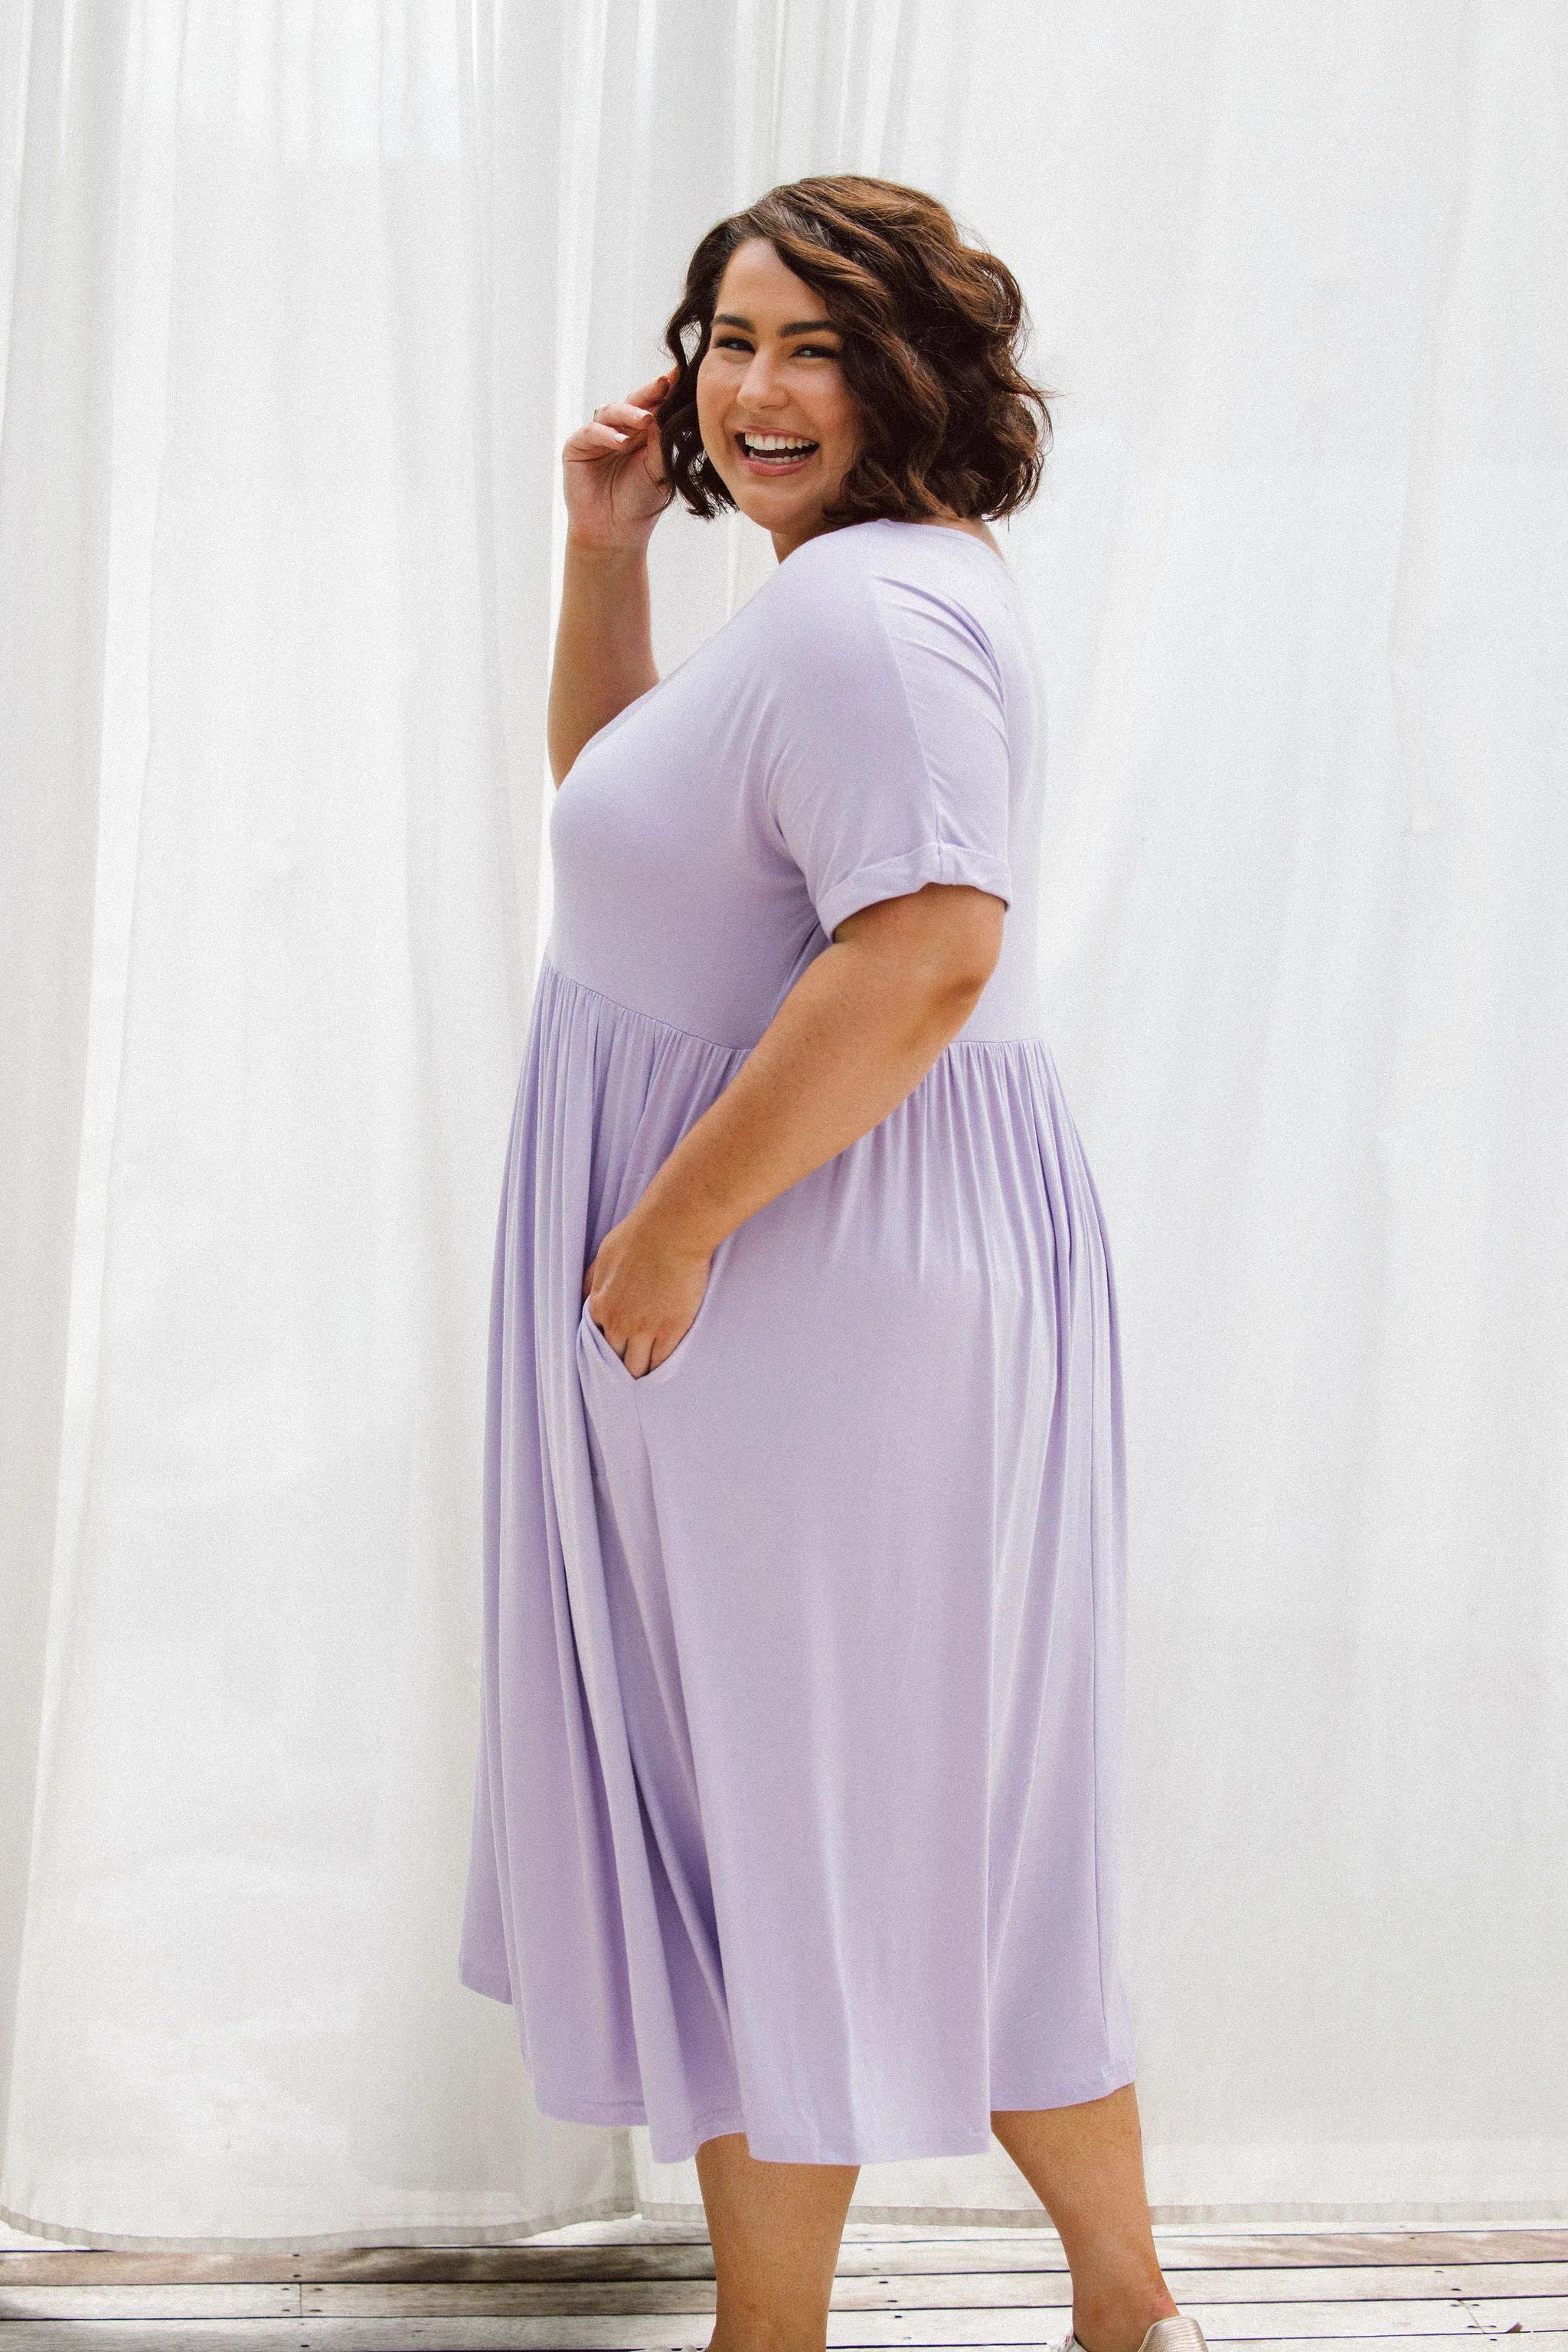 Charming Lilac Colored Plus Size Dress - Ashleigh Dress for Women